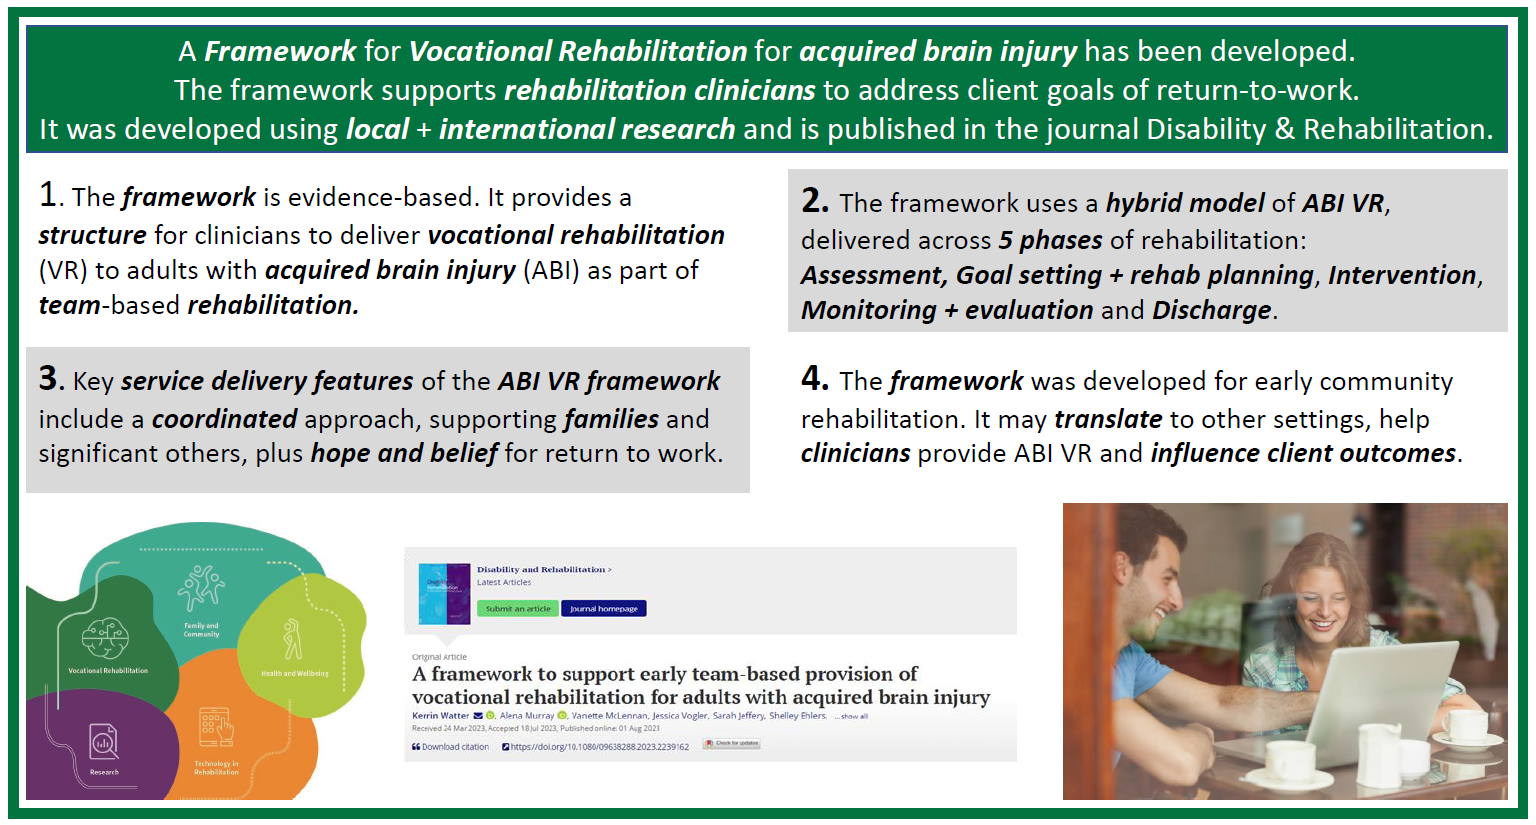 An infographic with green boarder outlining 4 key points from the research